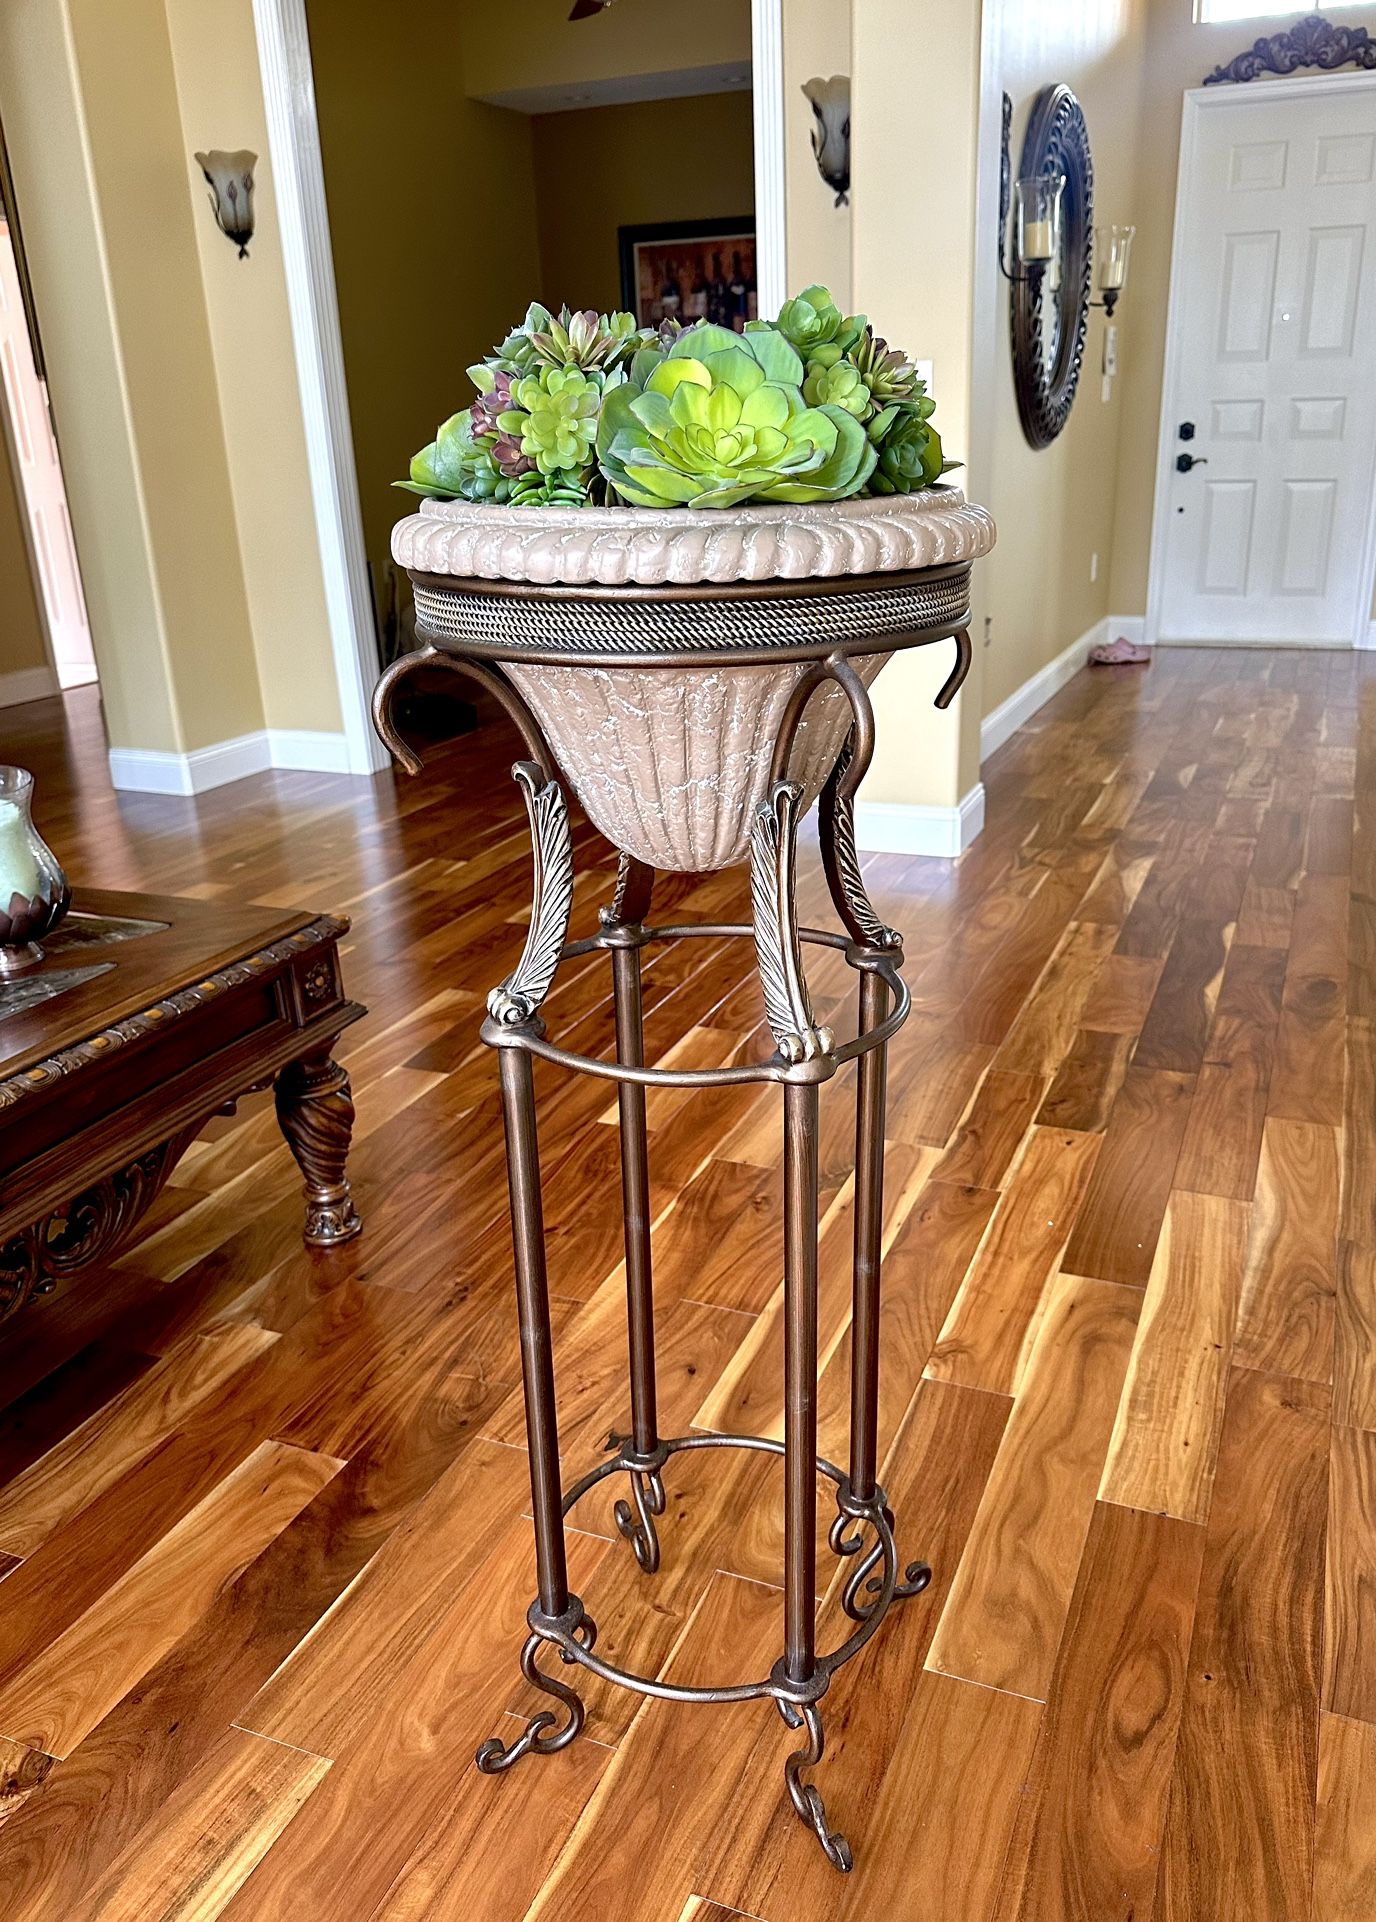 Vintage Antique Style Metal Plant Stand - Fake Succulents Included 